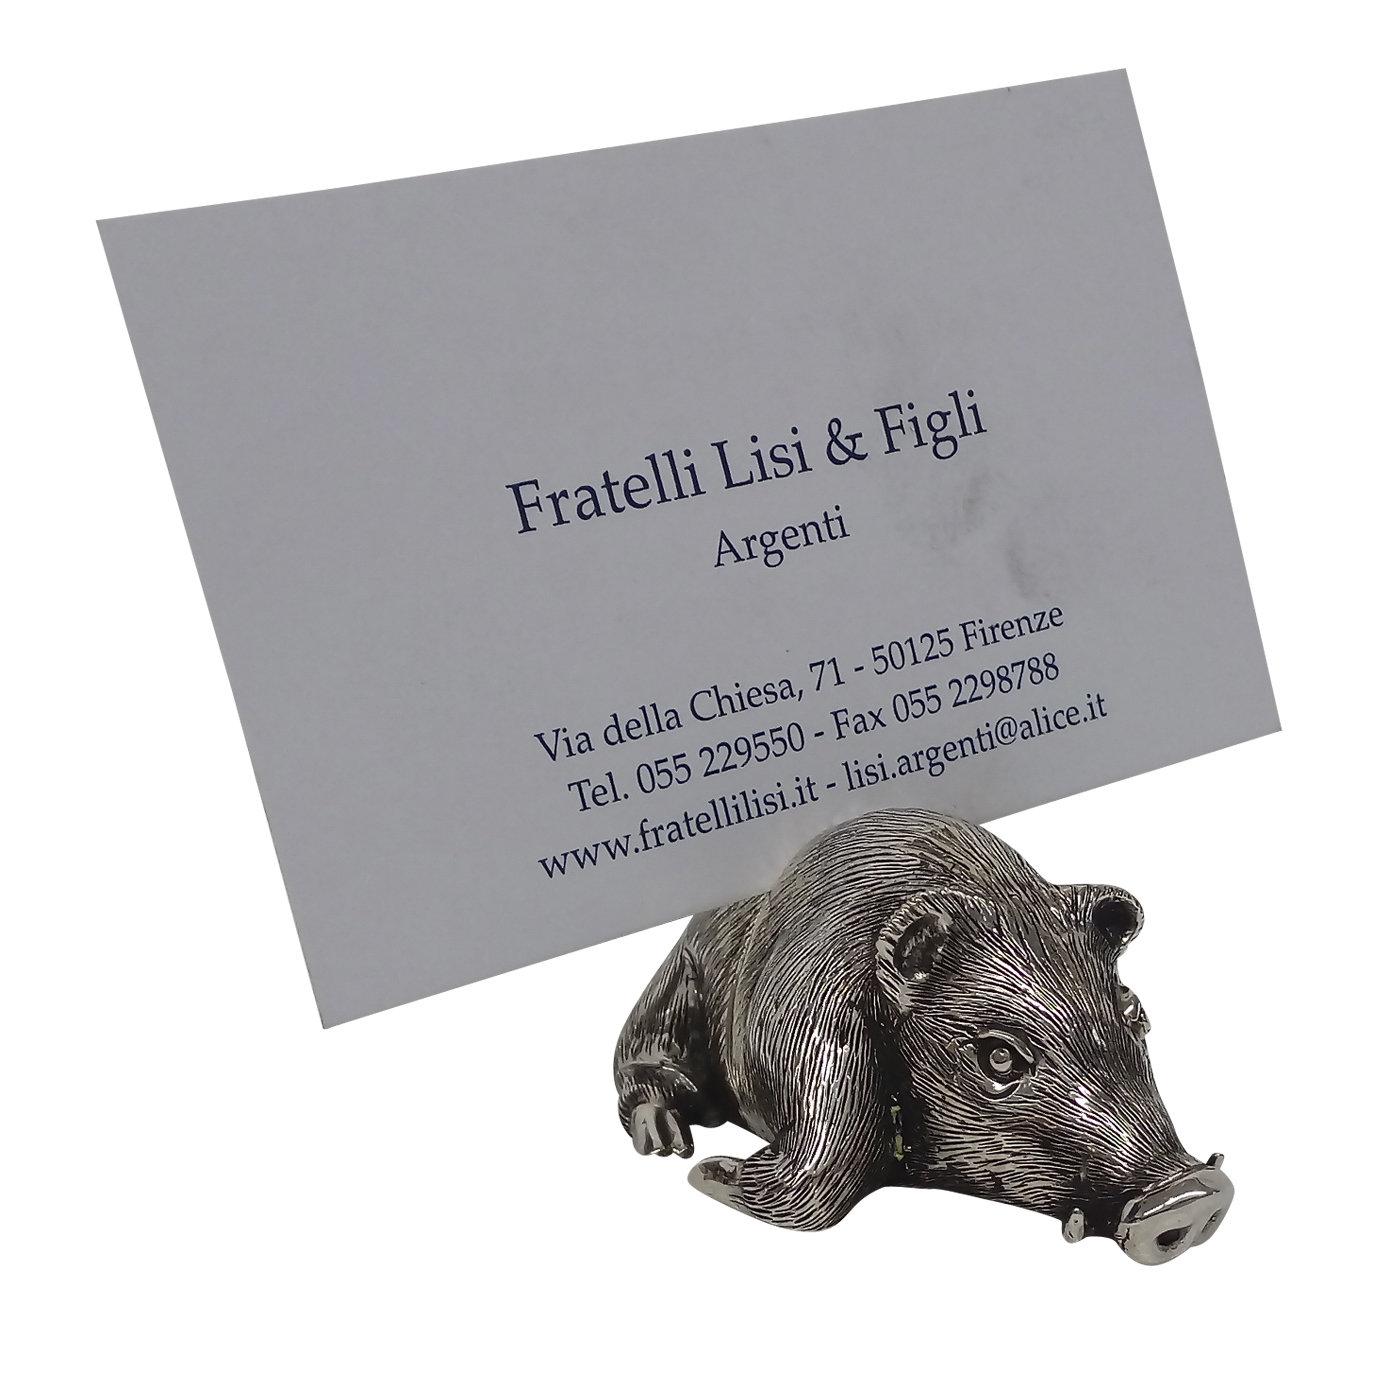 This charming card holder is meticulously crafted to depict a wild boar, an icon in Italian culture. This piece will make the perfect addition to a desk in a study or even at the office, perfect for holding business cards while at the same time